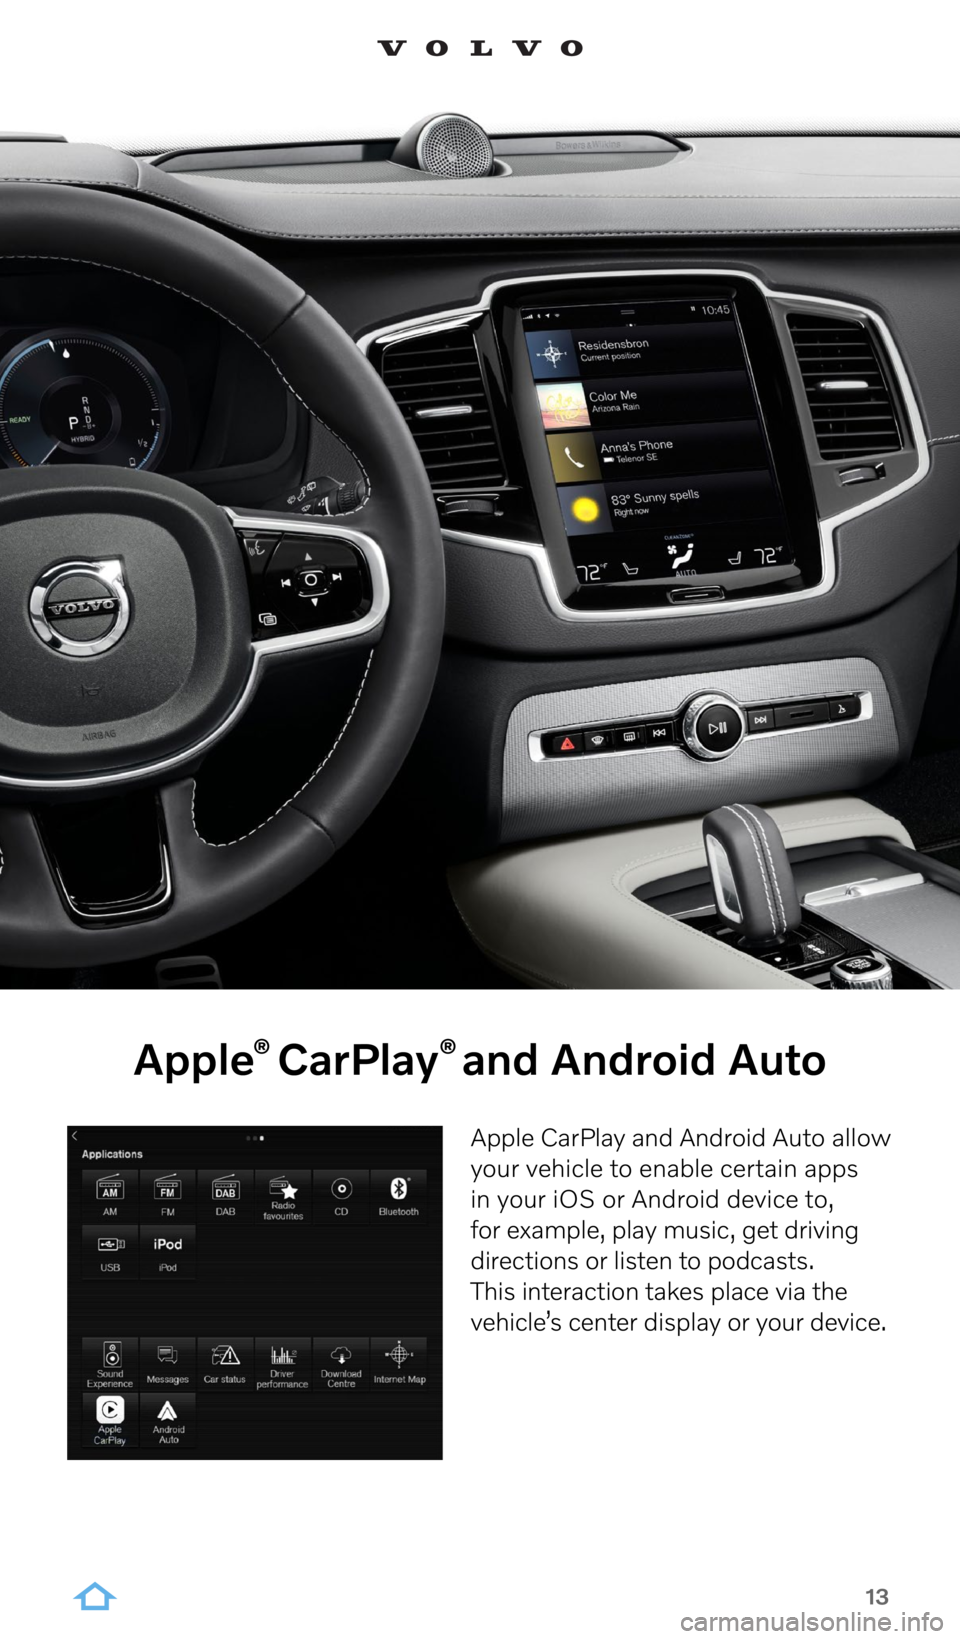 VOLVO XC90 RECHARGE 2022  Sensus Digital Guide 13
Apple CarPlay and Android Auto allow 
your vehicle to enable certain apps 
in your iOS or Android device to, 
for example, play music, get driving 
directions or listen to podcasts. 
This interacti